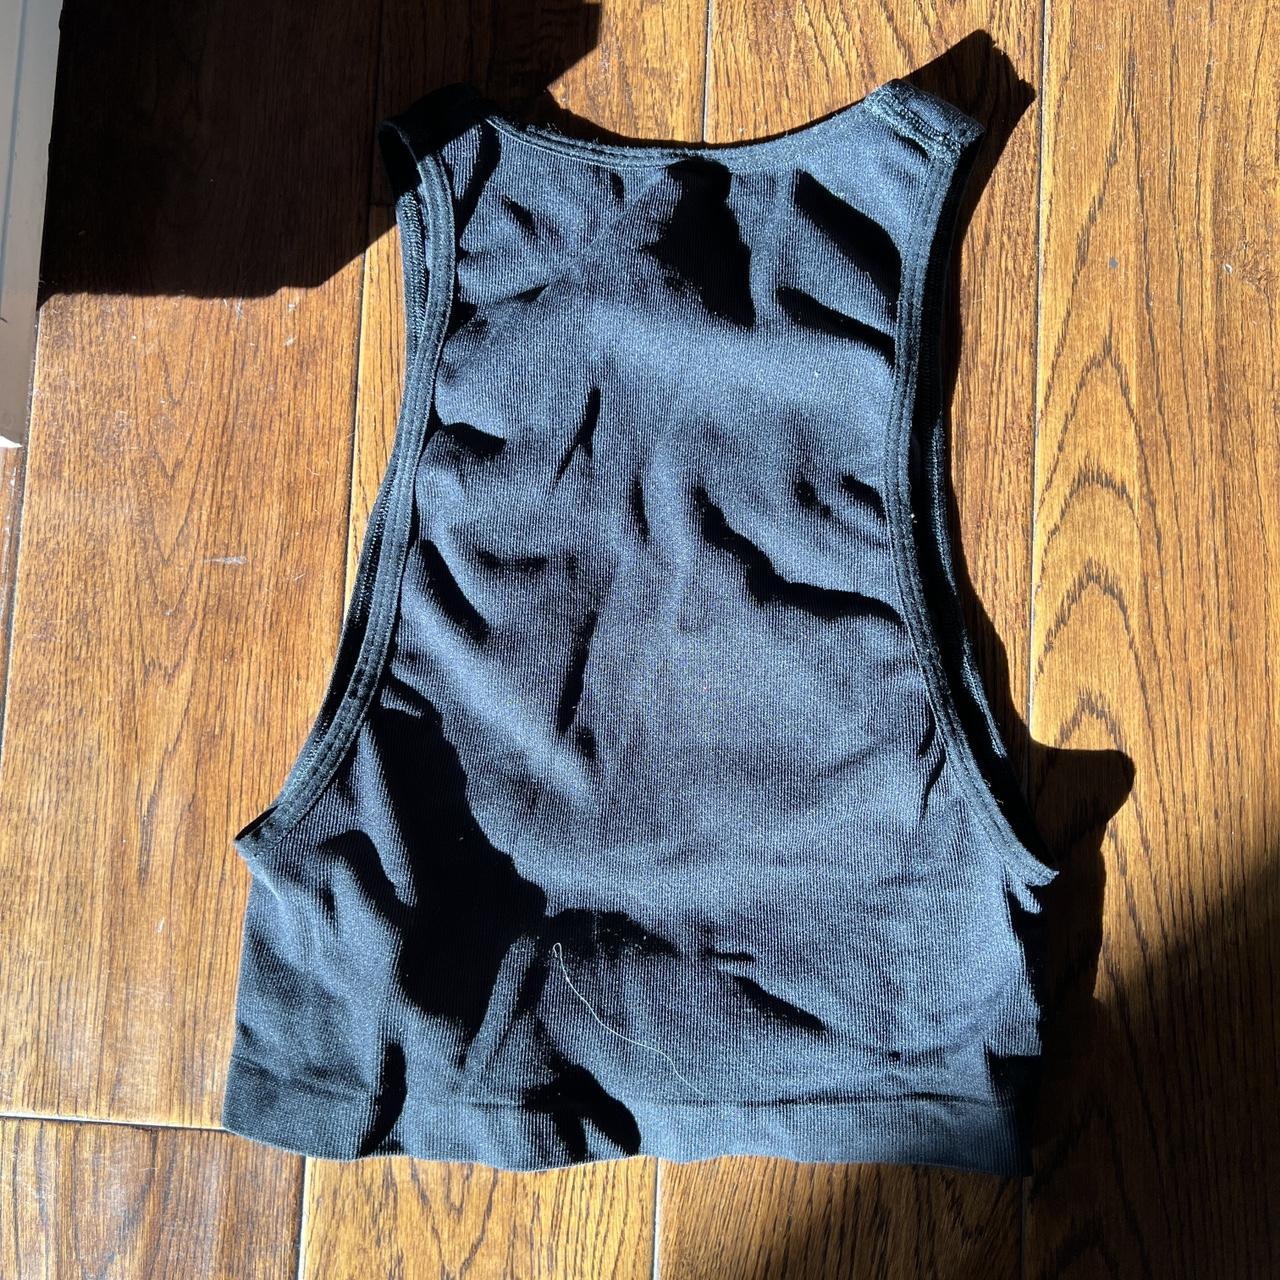 Urban Outfitters Women's Black Crop-top (3)